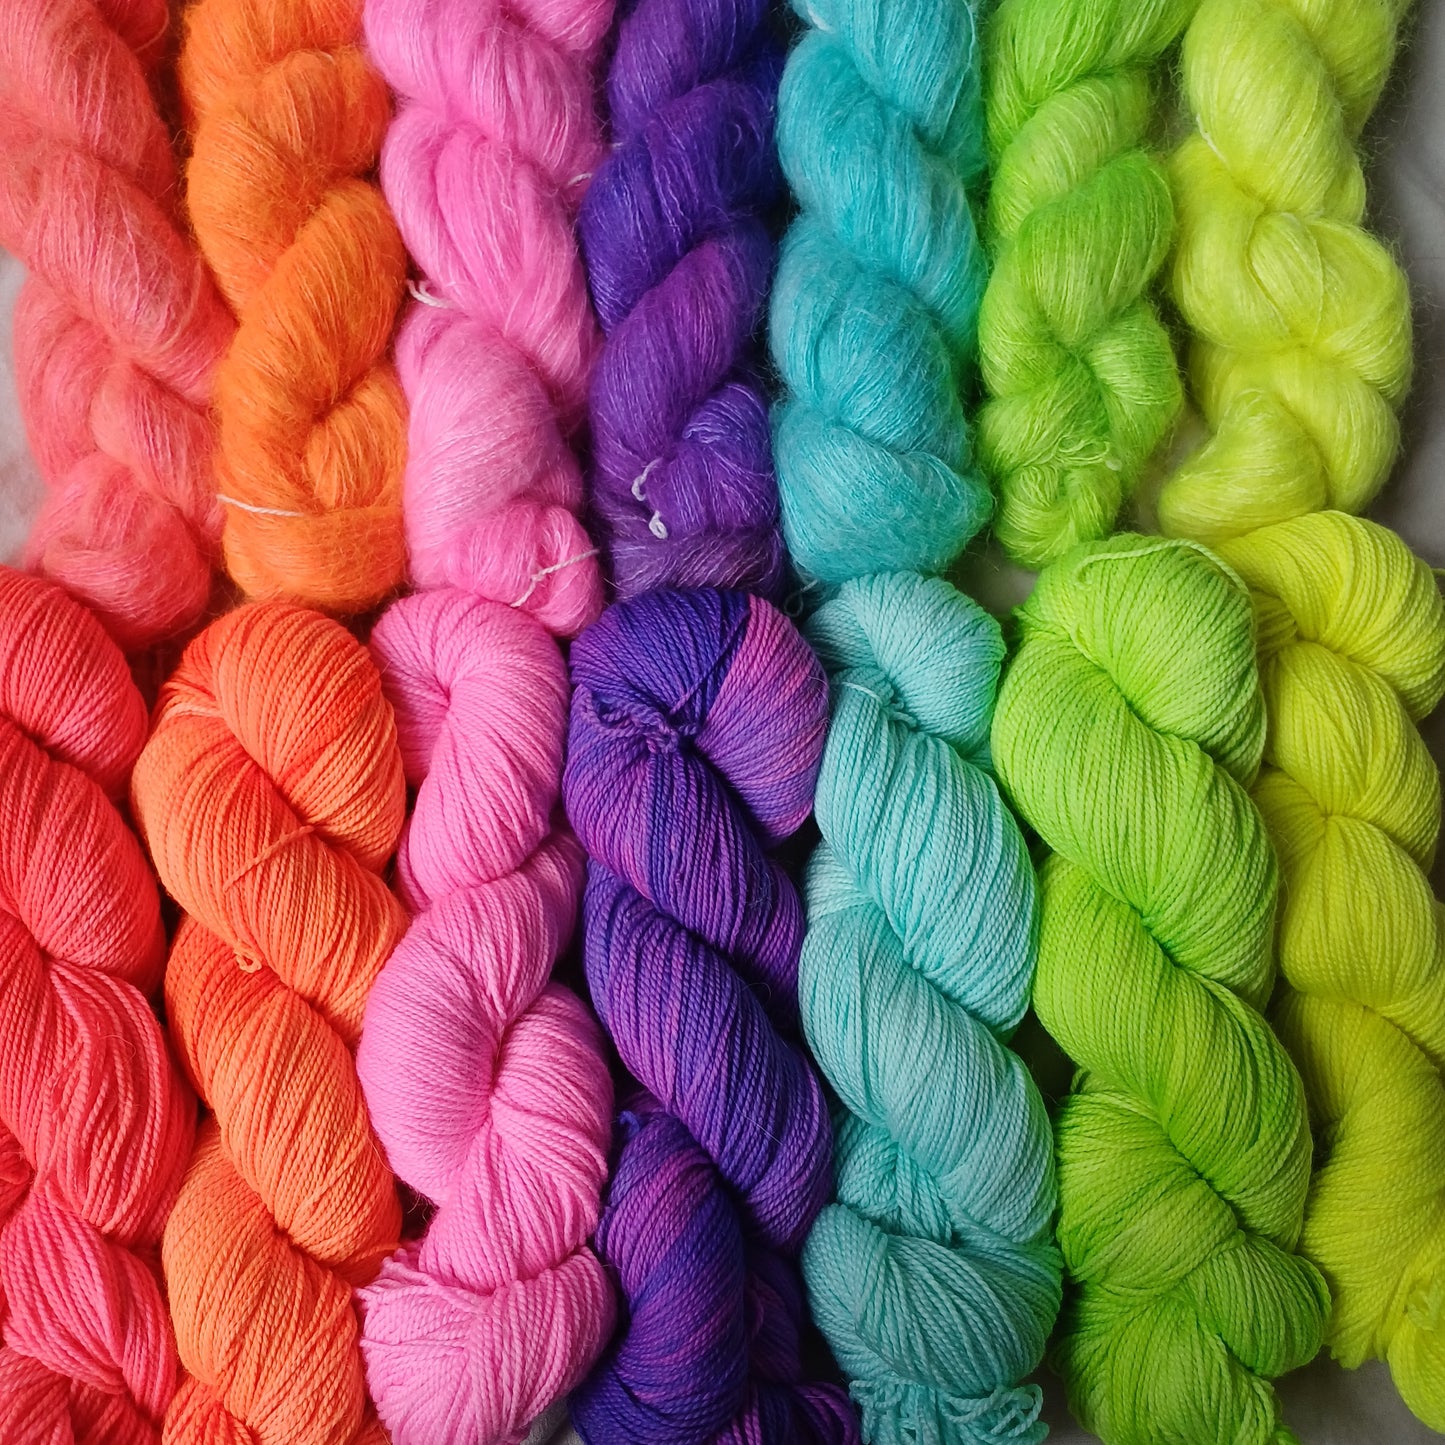 The Neon Edit "Brighter than the Ocean" in Frog Mouse Twisty Sock